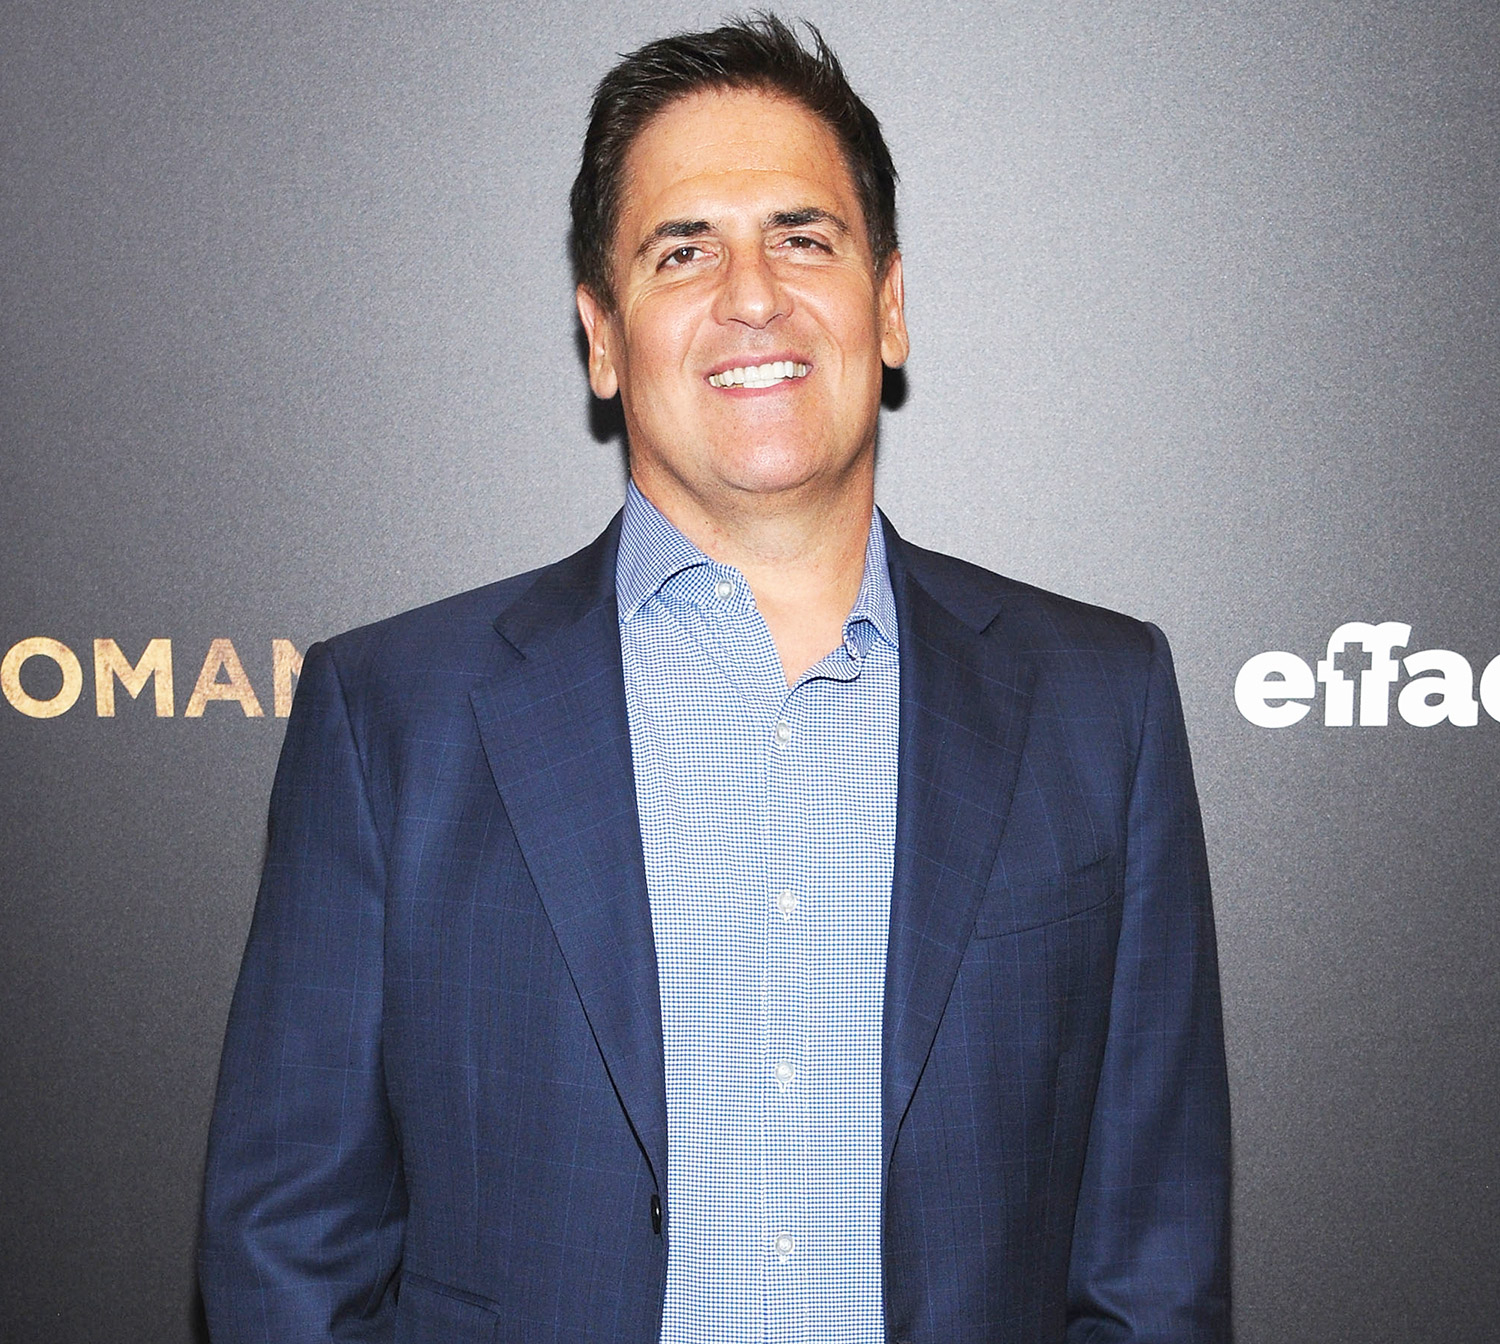 Who Is Mark Cuban's Wife? All About Tiffany Stewart